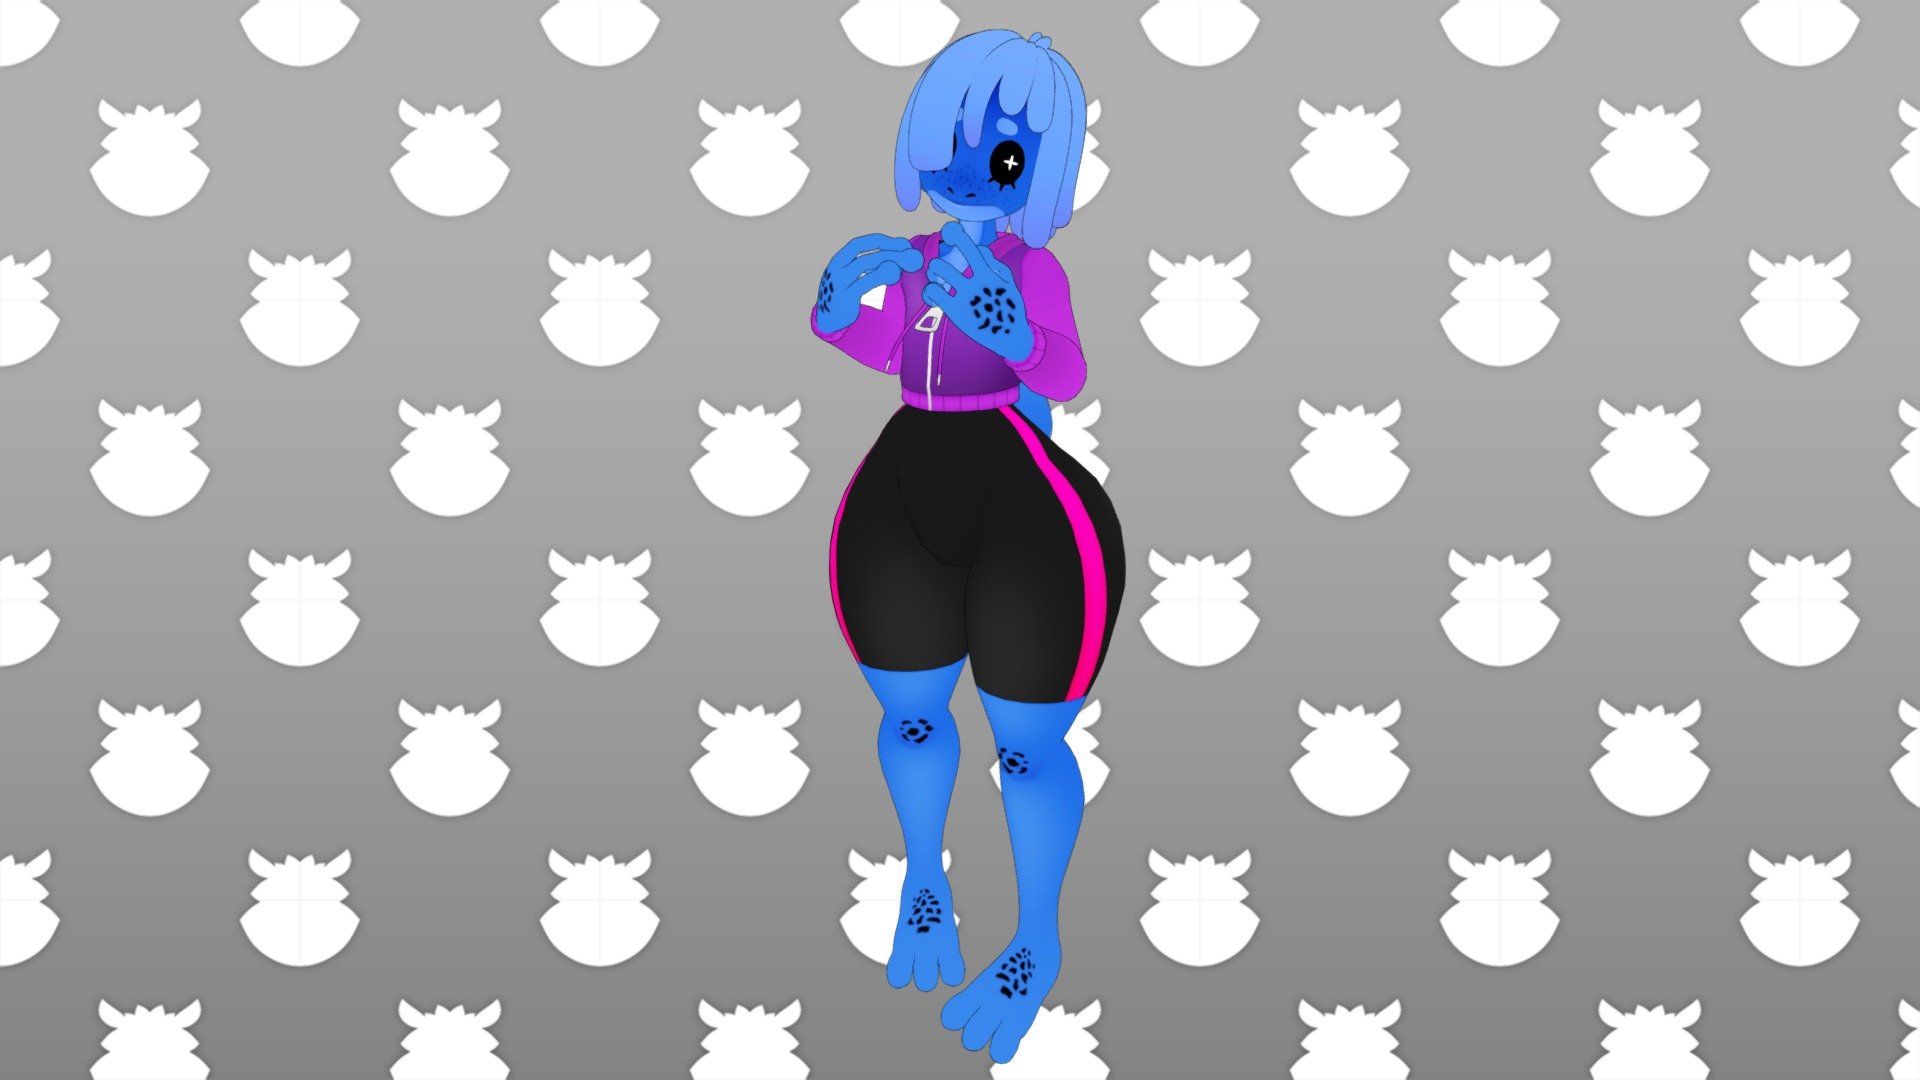 Model I was commissioned to make for use in VRChat.

If you like my work and would like to support it you can check out my Patreon or if you're interested in having me make a character for you then shoot me an inquiry through my website 3d model